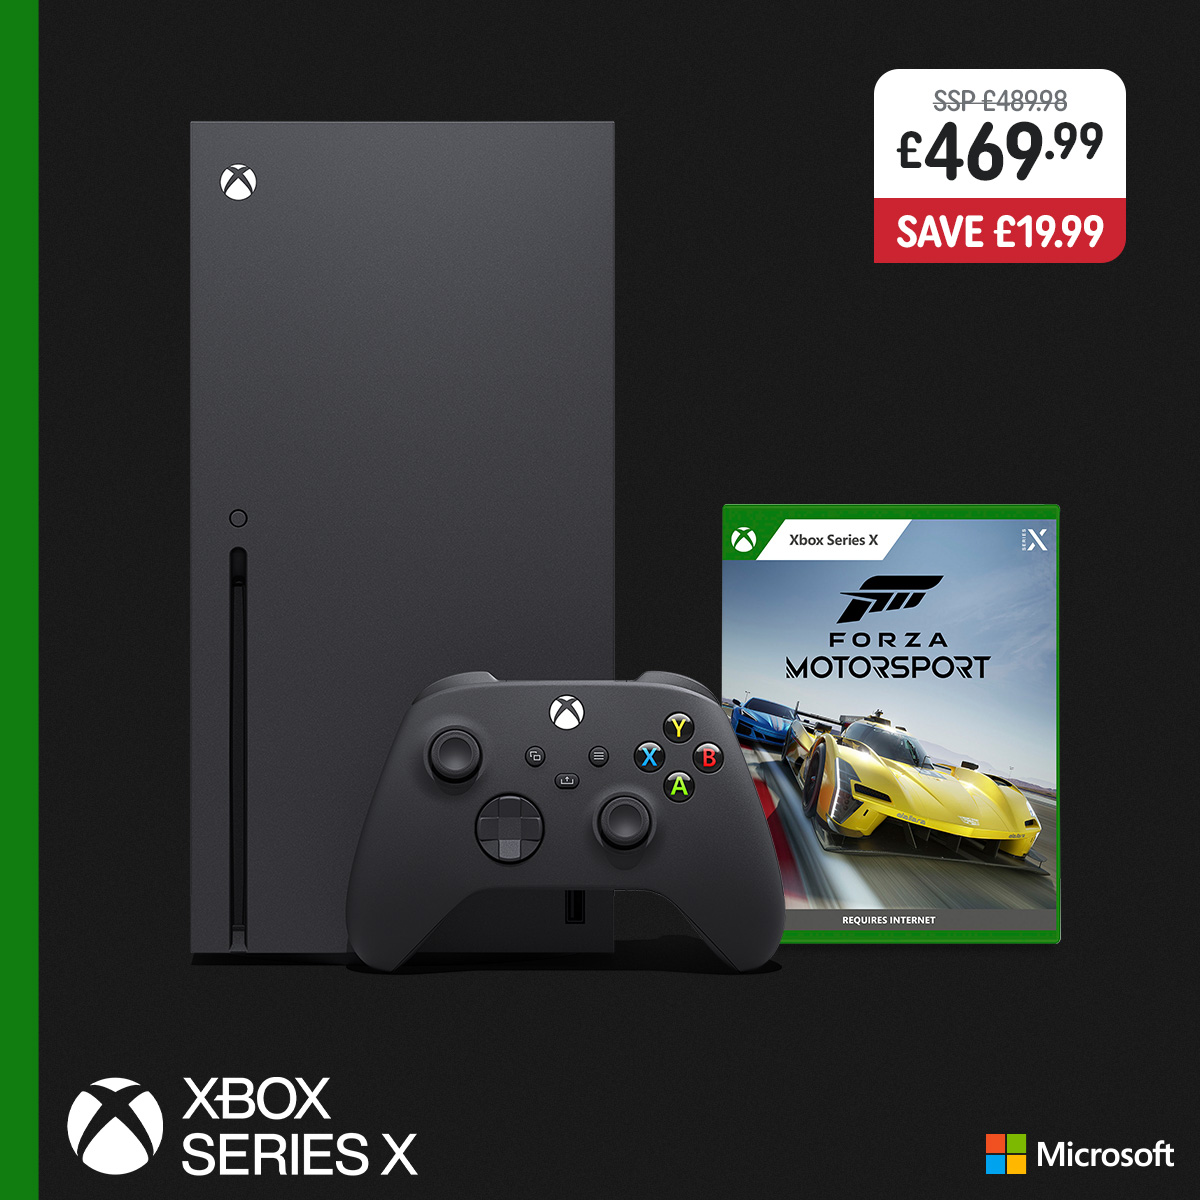 SAVE £19.99 on the Xbox Series X Console & Forza Motorsport Bundle! 🎮 ONLY £469.99! ✅ Offer is valid from April 5th-18th, while stocks last. Shop now at Smyths Toys 👉 tinyurl.com/256bbyy8